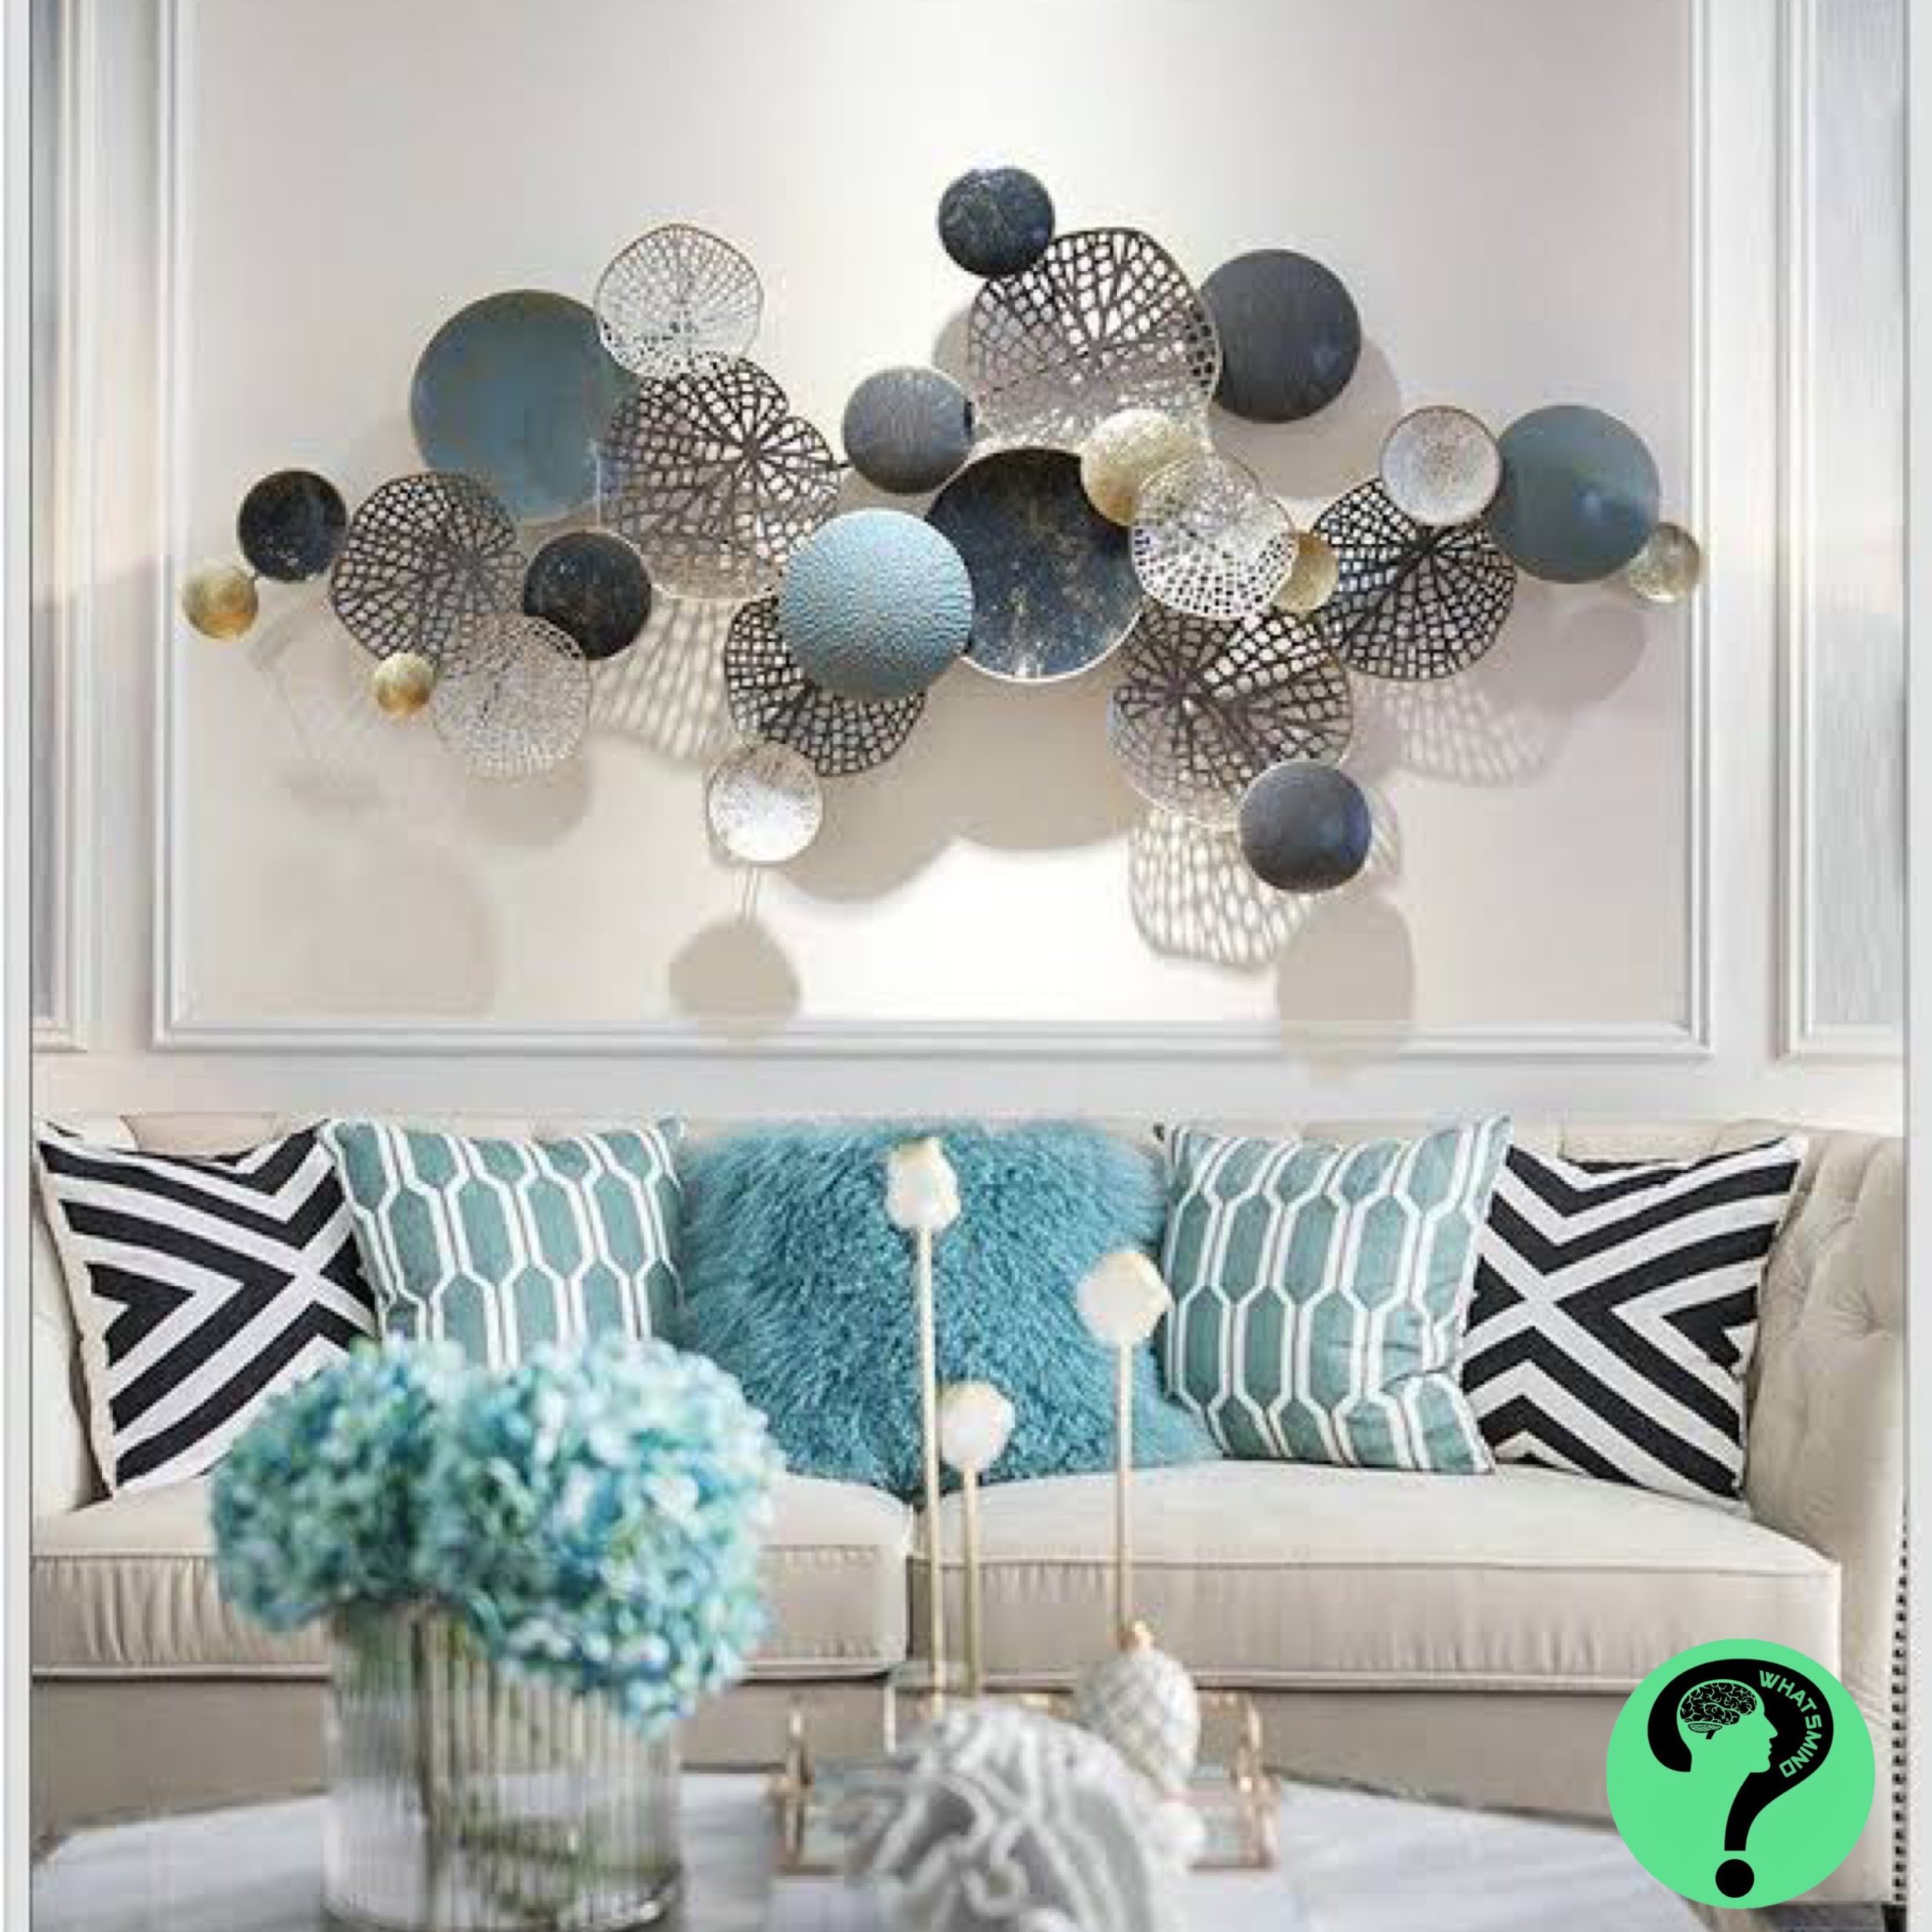 How to Accurately Execute Wall Decor - Smart Tips